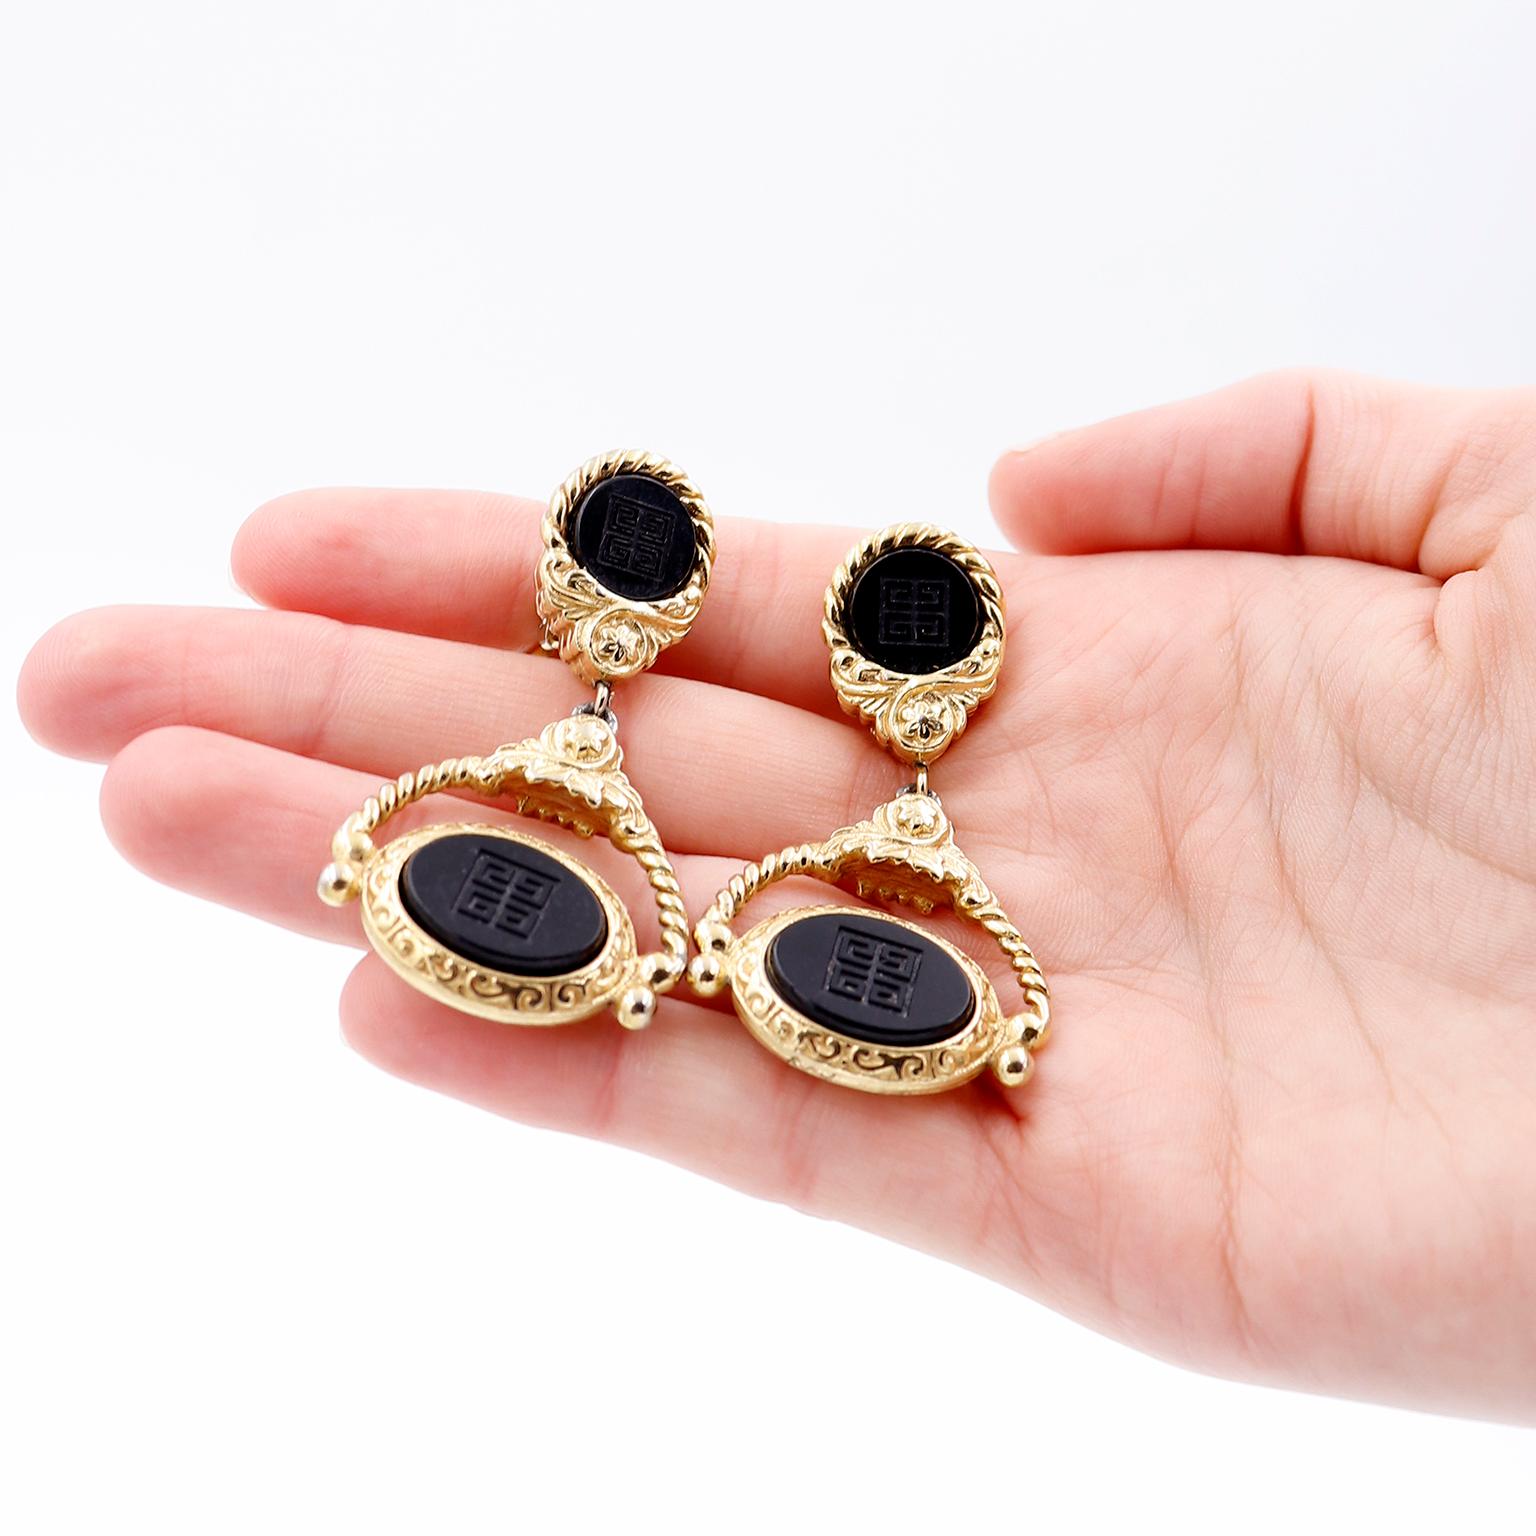 These vintage Givenchy door knocker style earrings feature twisted gold plated metal and a round and oval black matte enamel that has the givenchy logo engraved in the center. These great vintage drop earrings are so elegant and they have clip